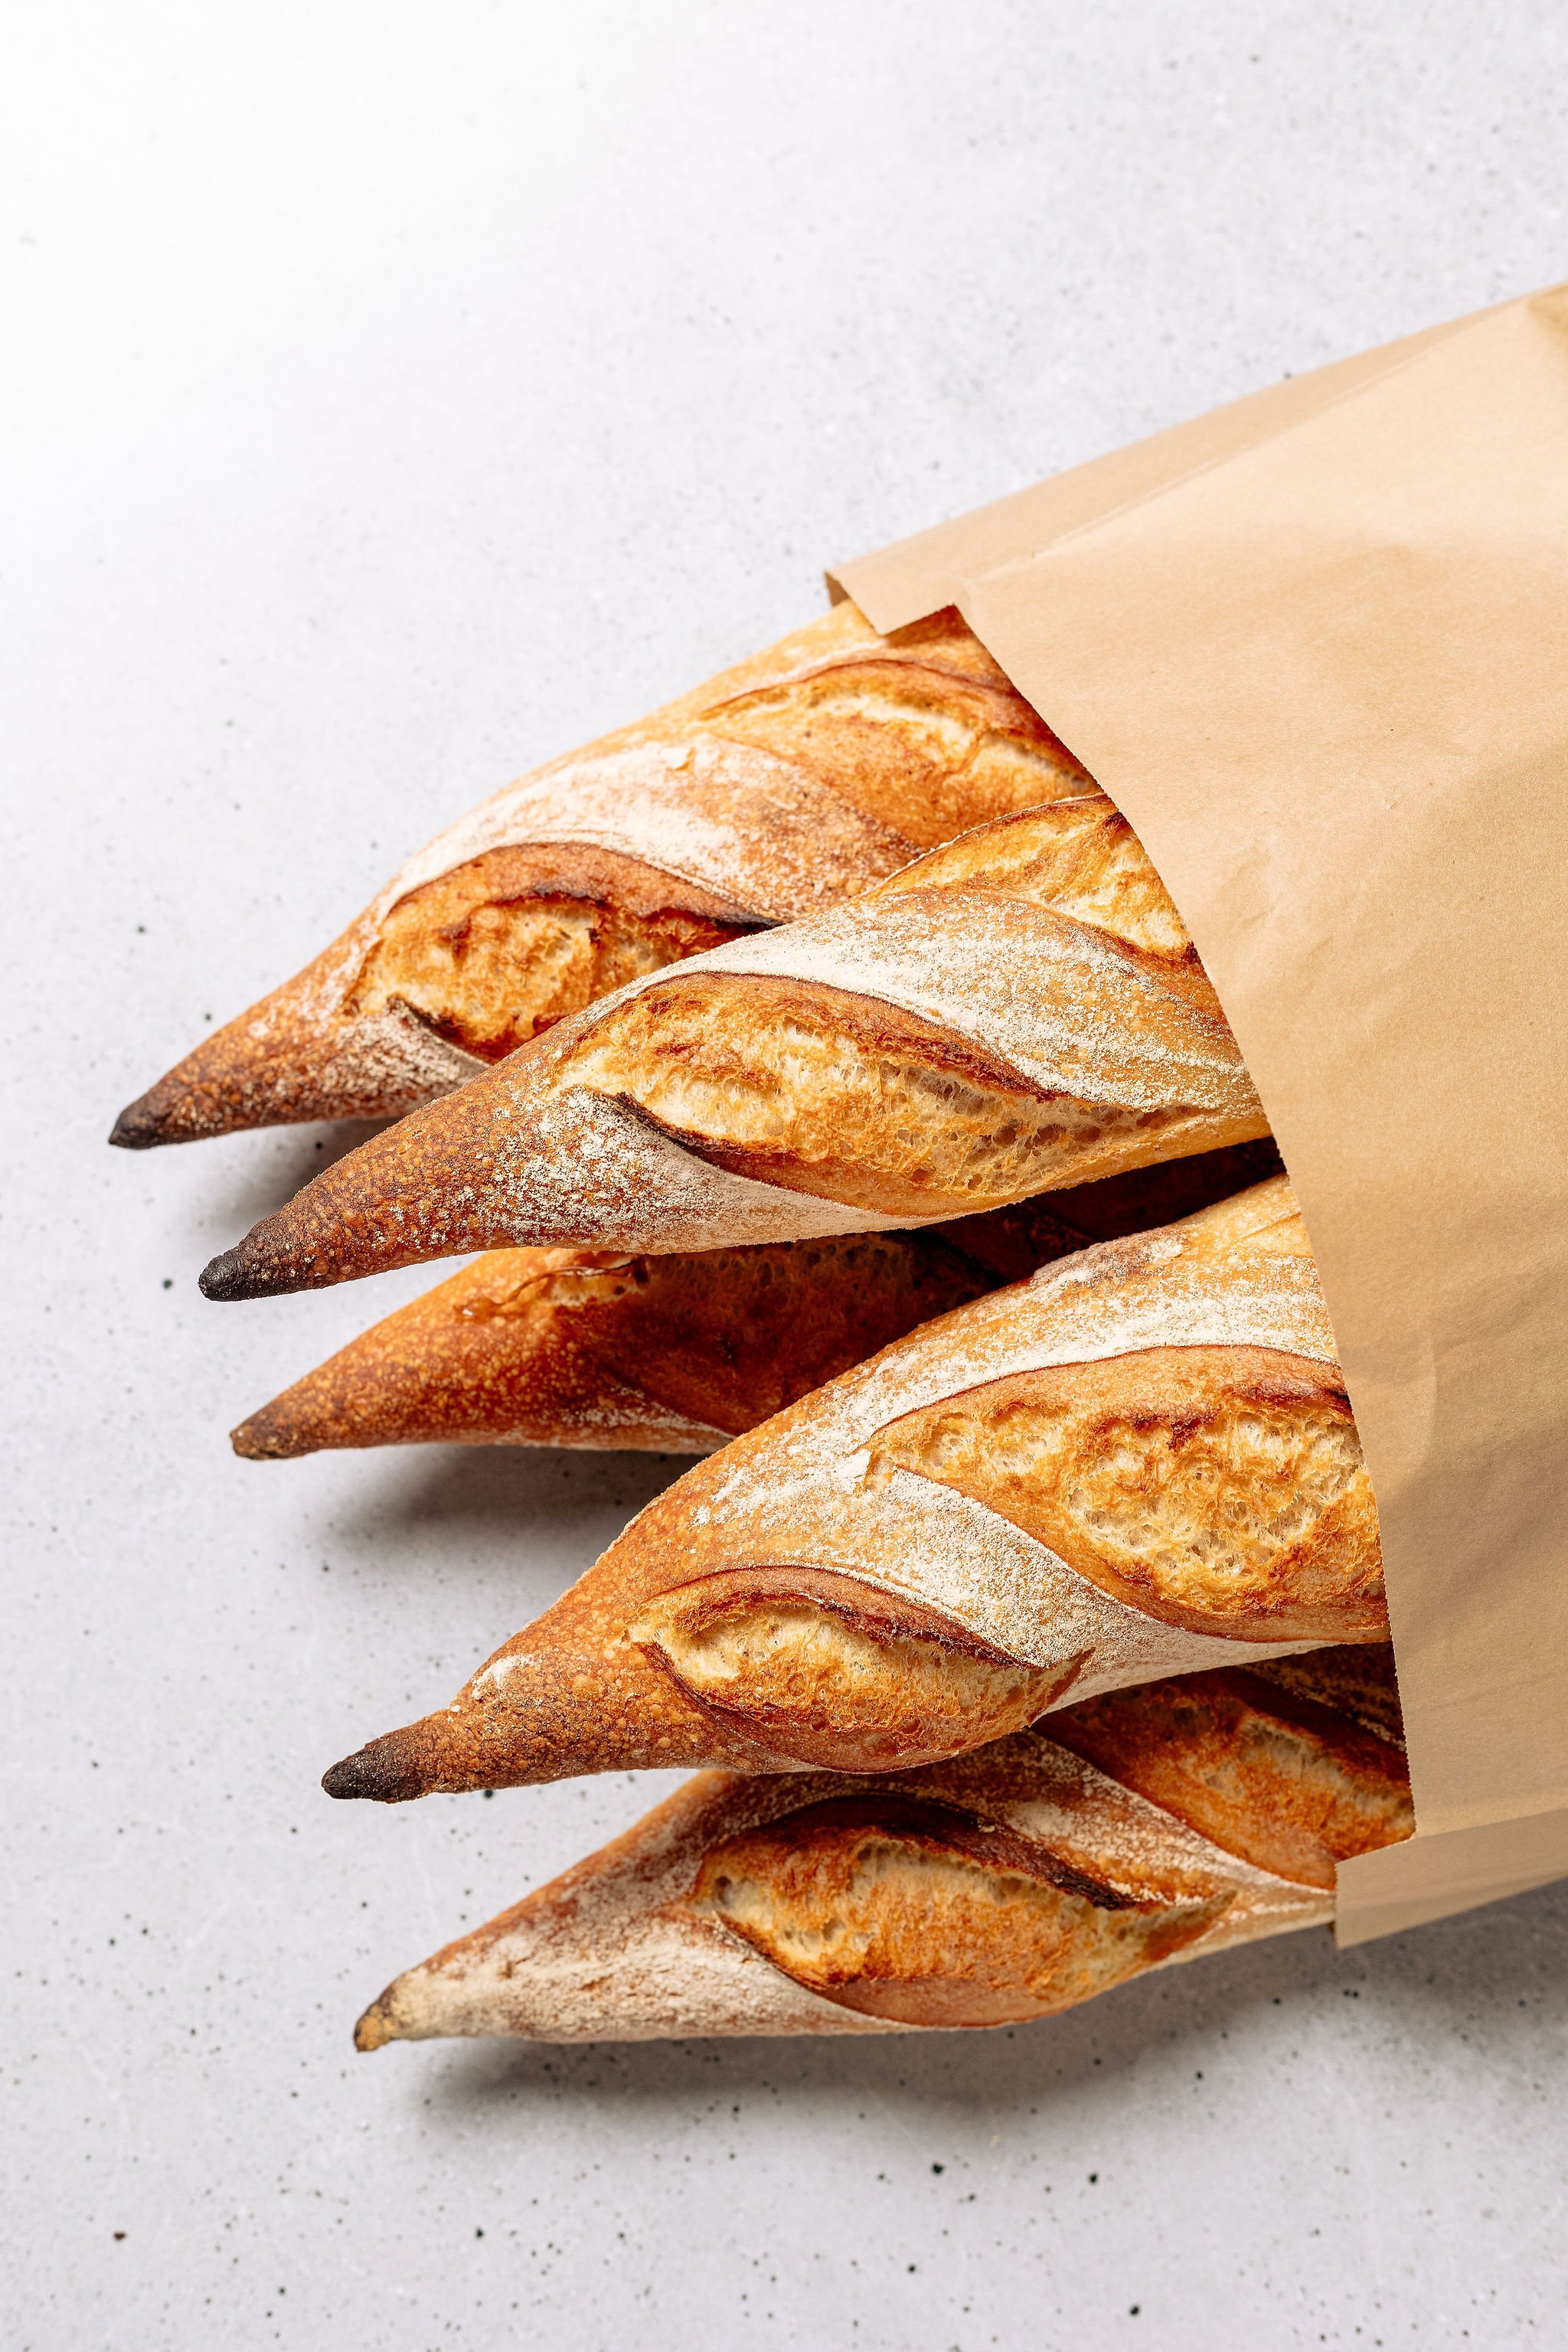 Canberra food photographer - baguettes in paper bag